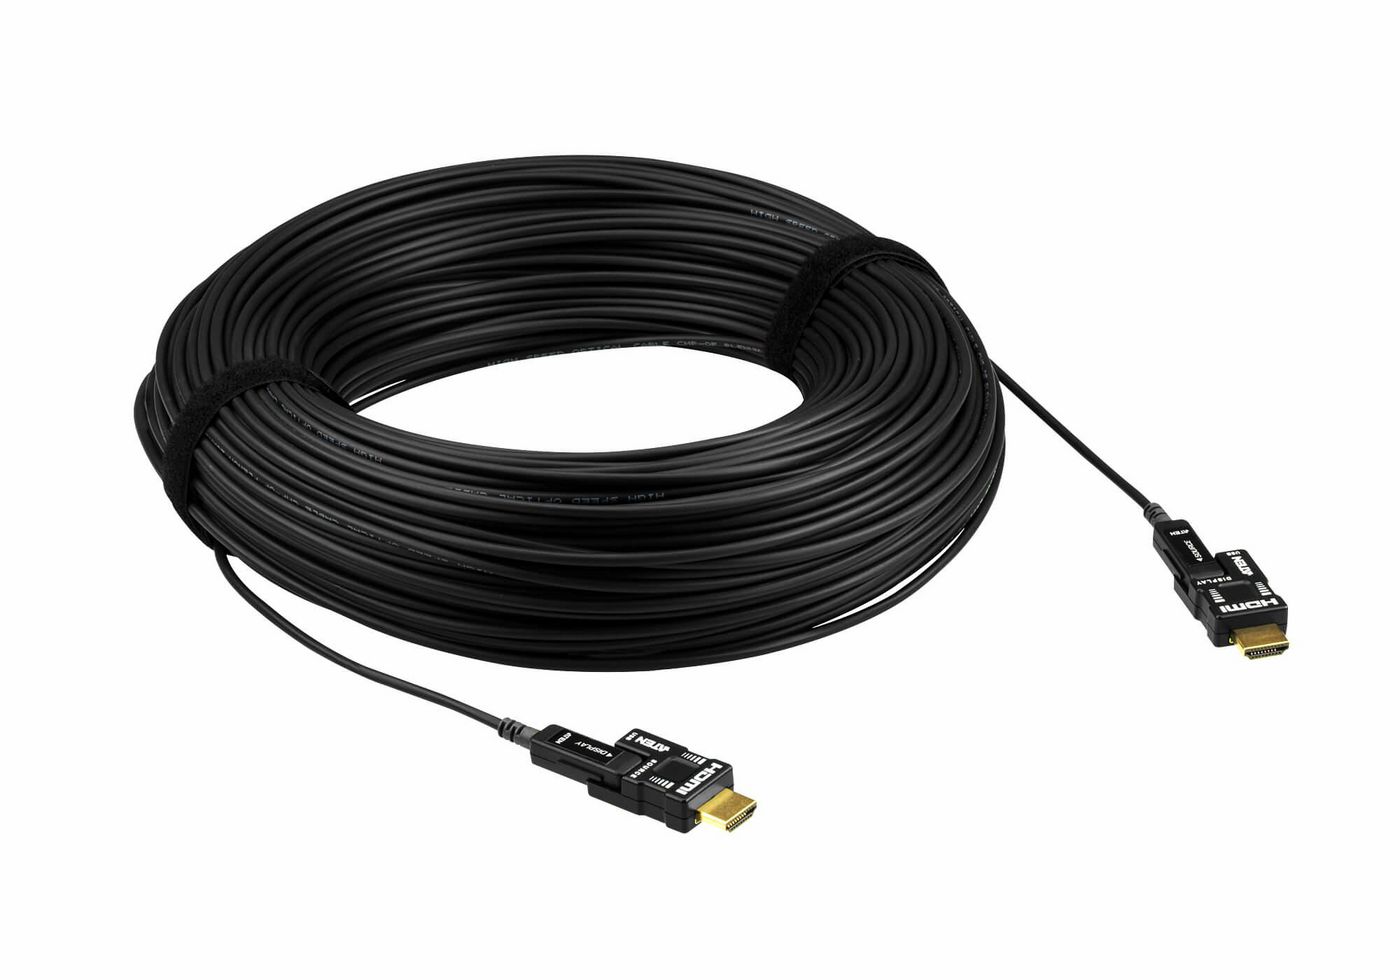 Aten VE7834-AT 60m 4K HDMI Active Opt Cable 